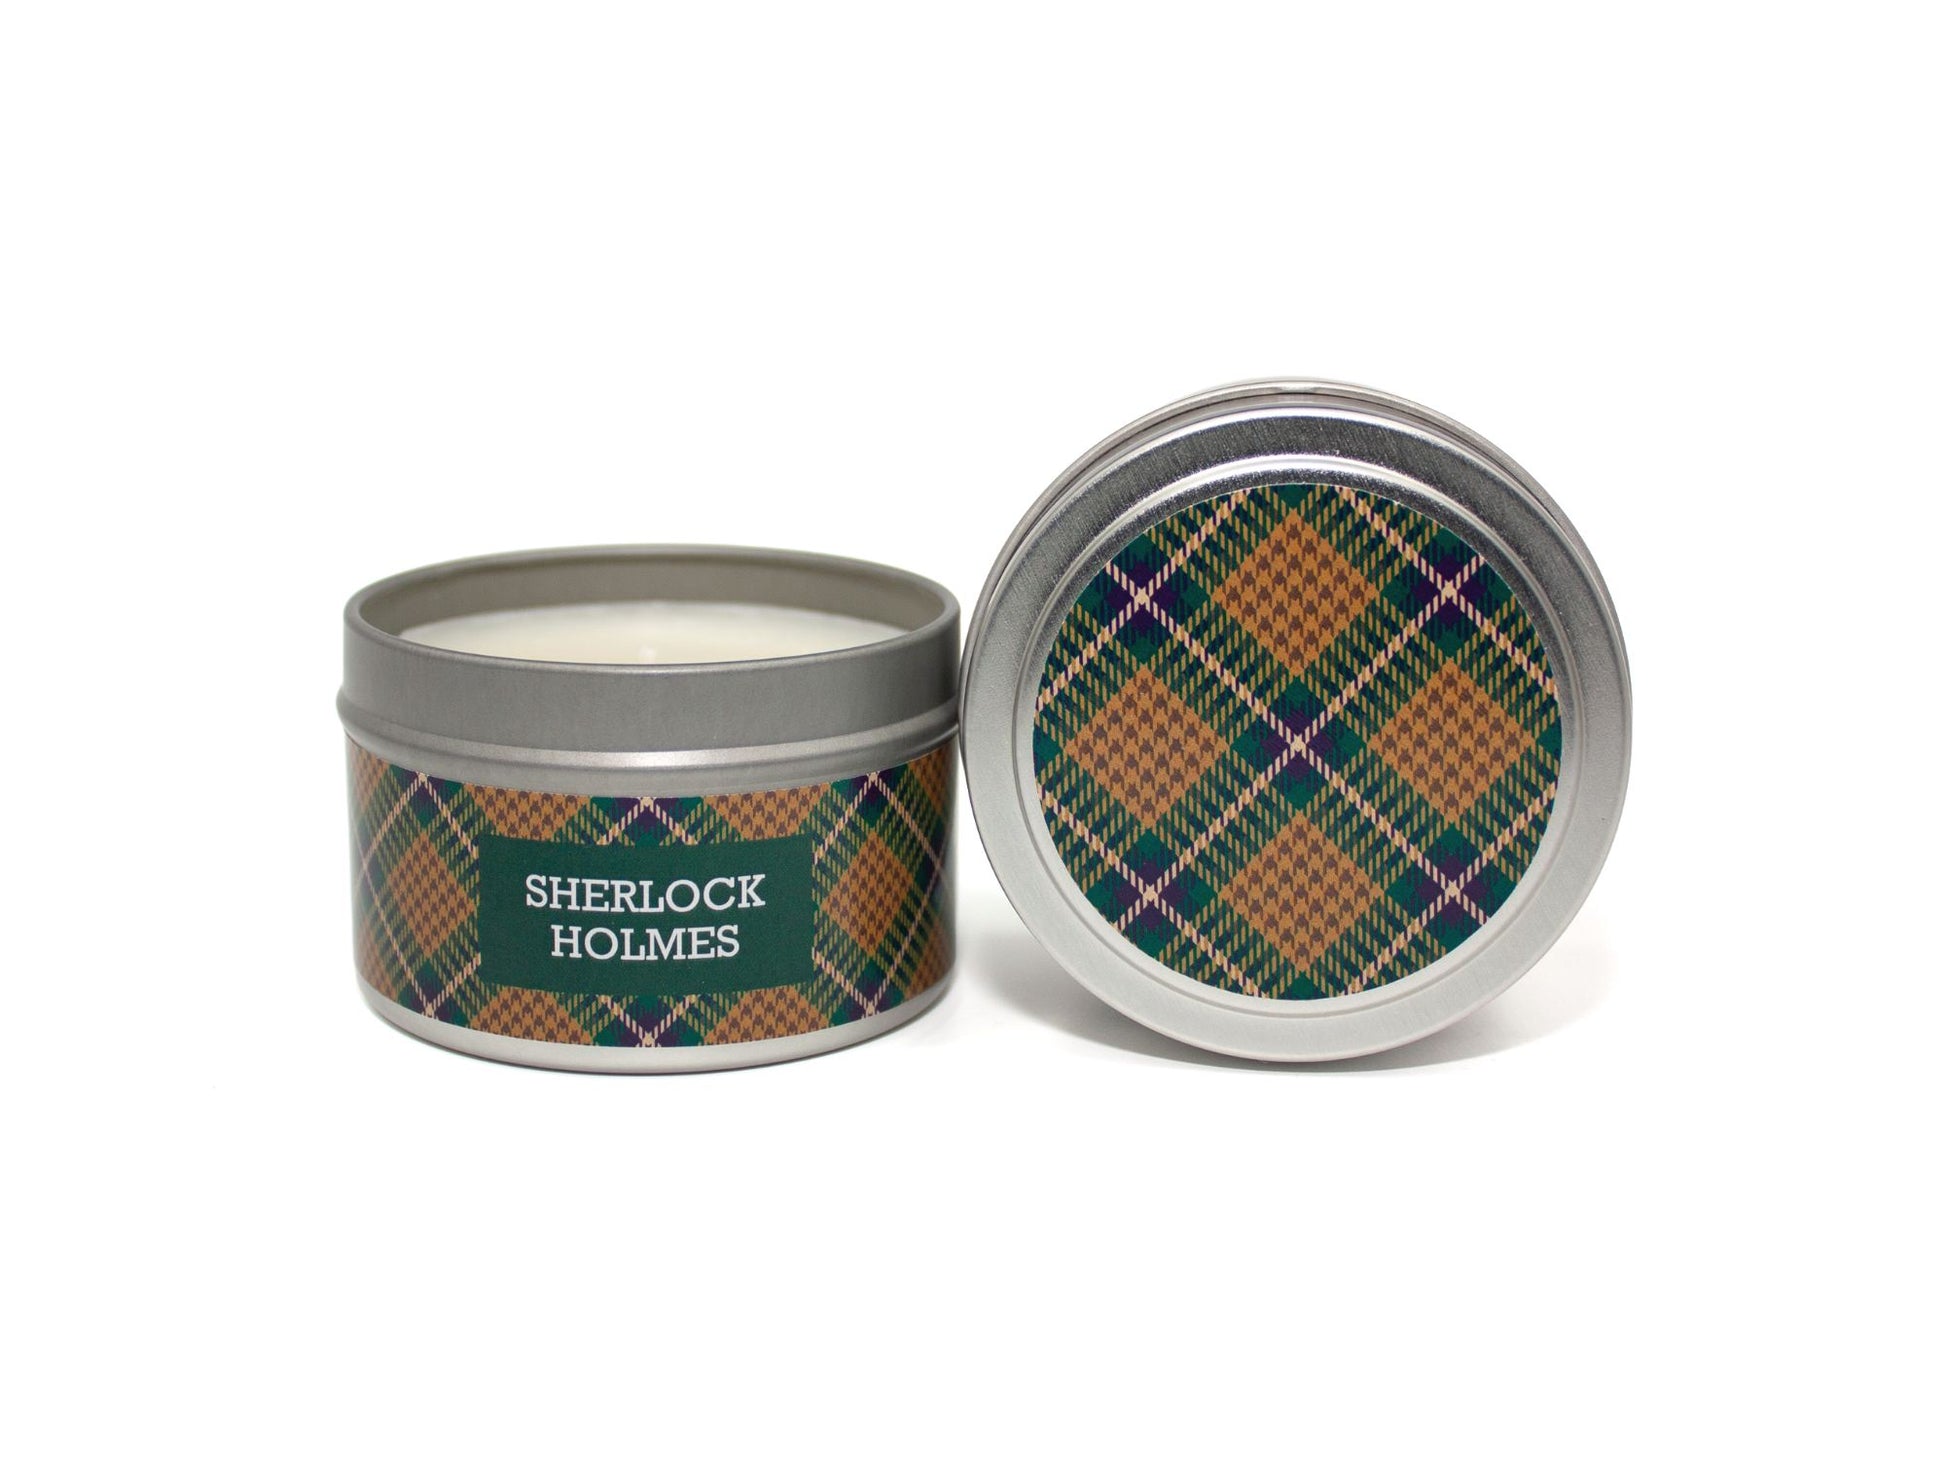 Onset & Rime woody tobacco scented candle called "Sherlock Holmes" in a 4 oz silver tin. The circular label on top is a gold and green plaid pattern. The text on the front label is "Sherlock Holmes - Cardamom, Tobacco, Teakwood".